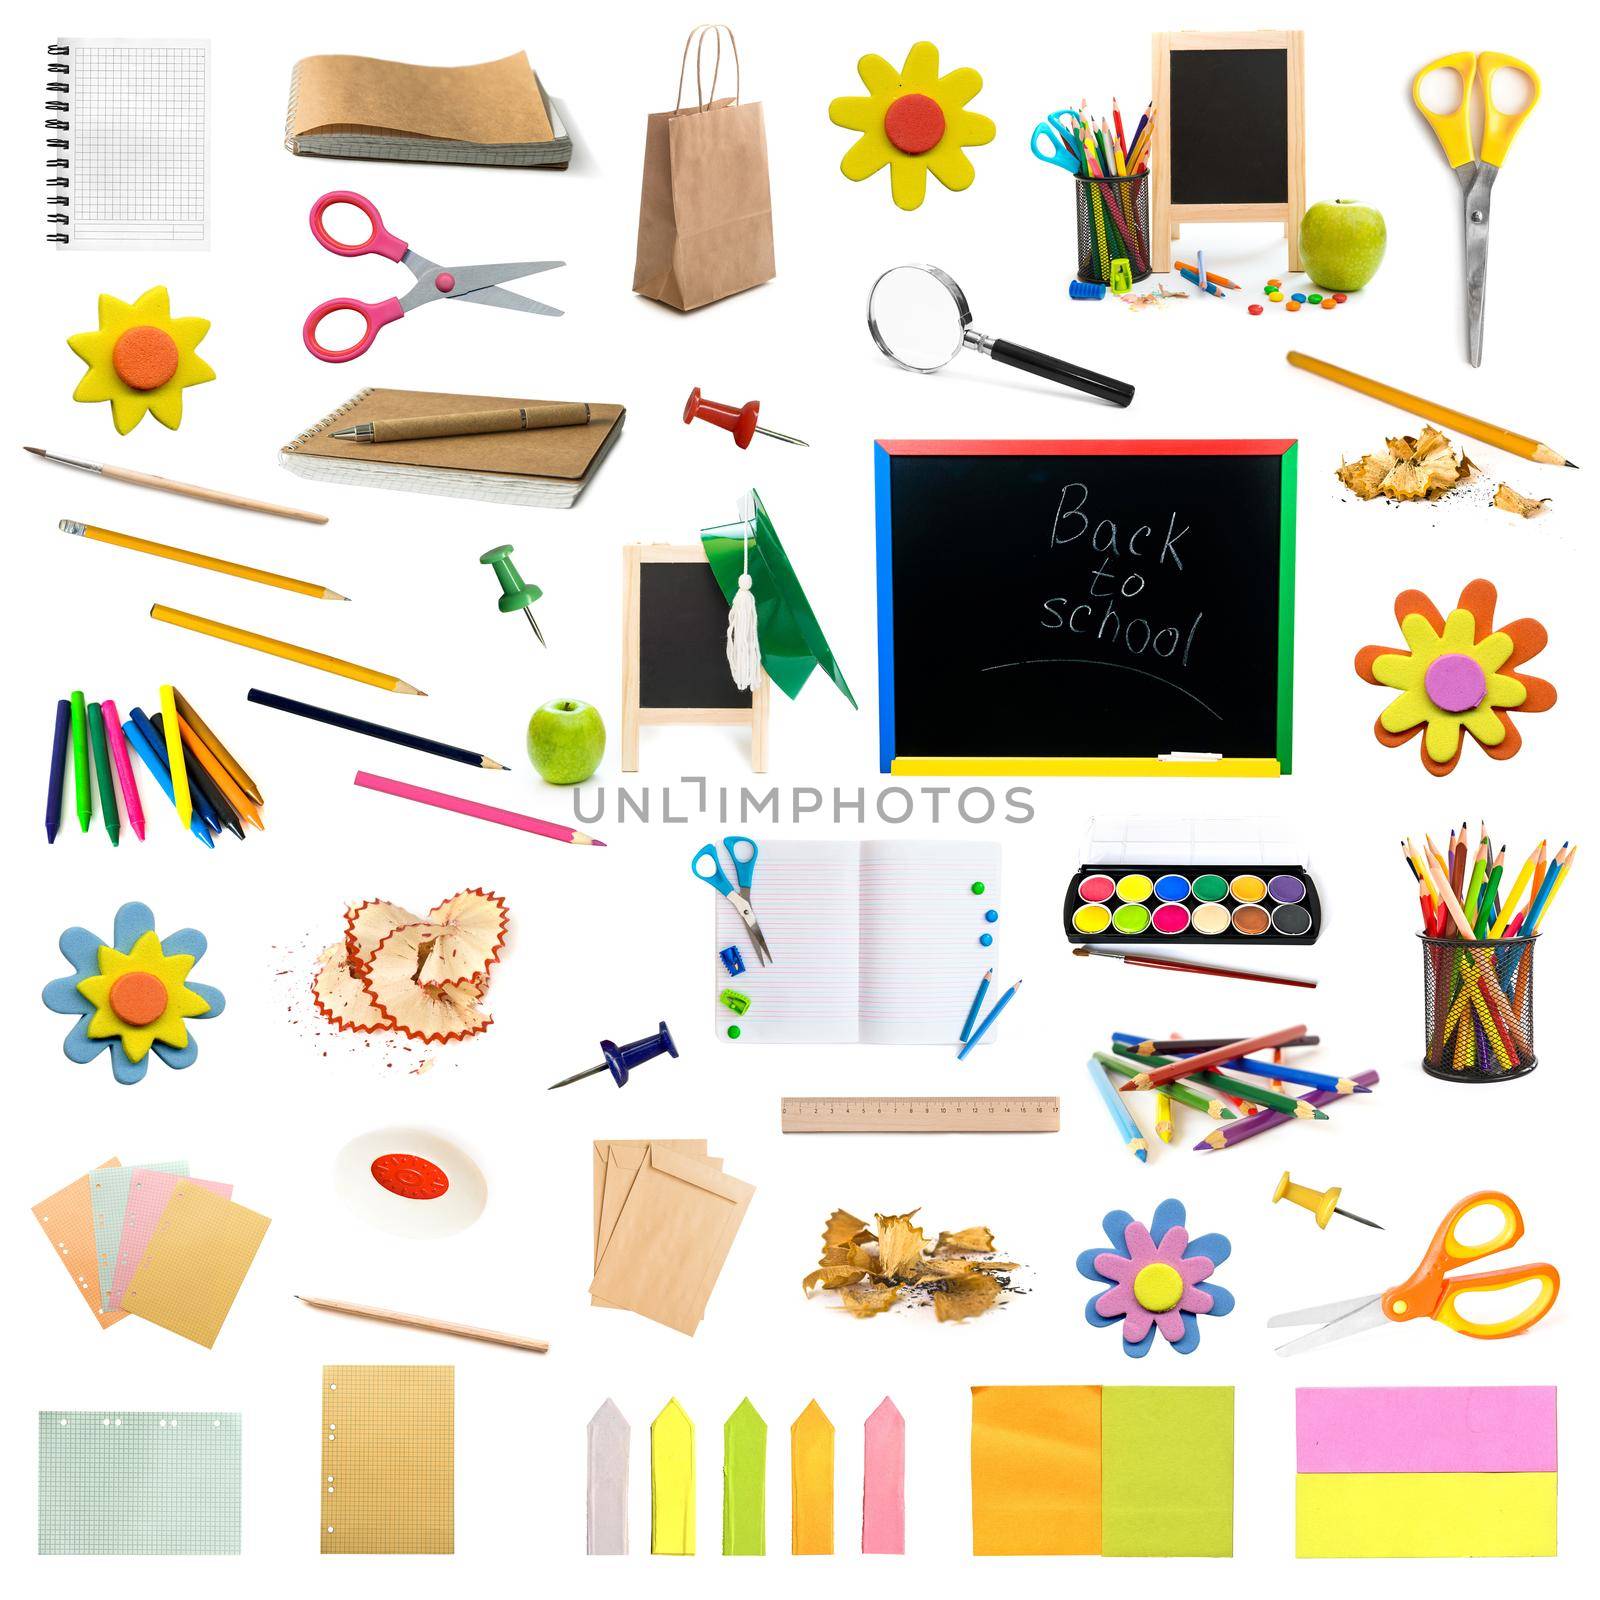 collage of different colorful childish stationery isolated on white background